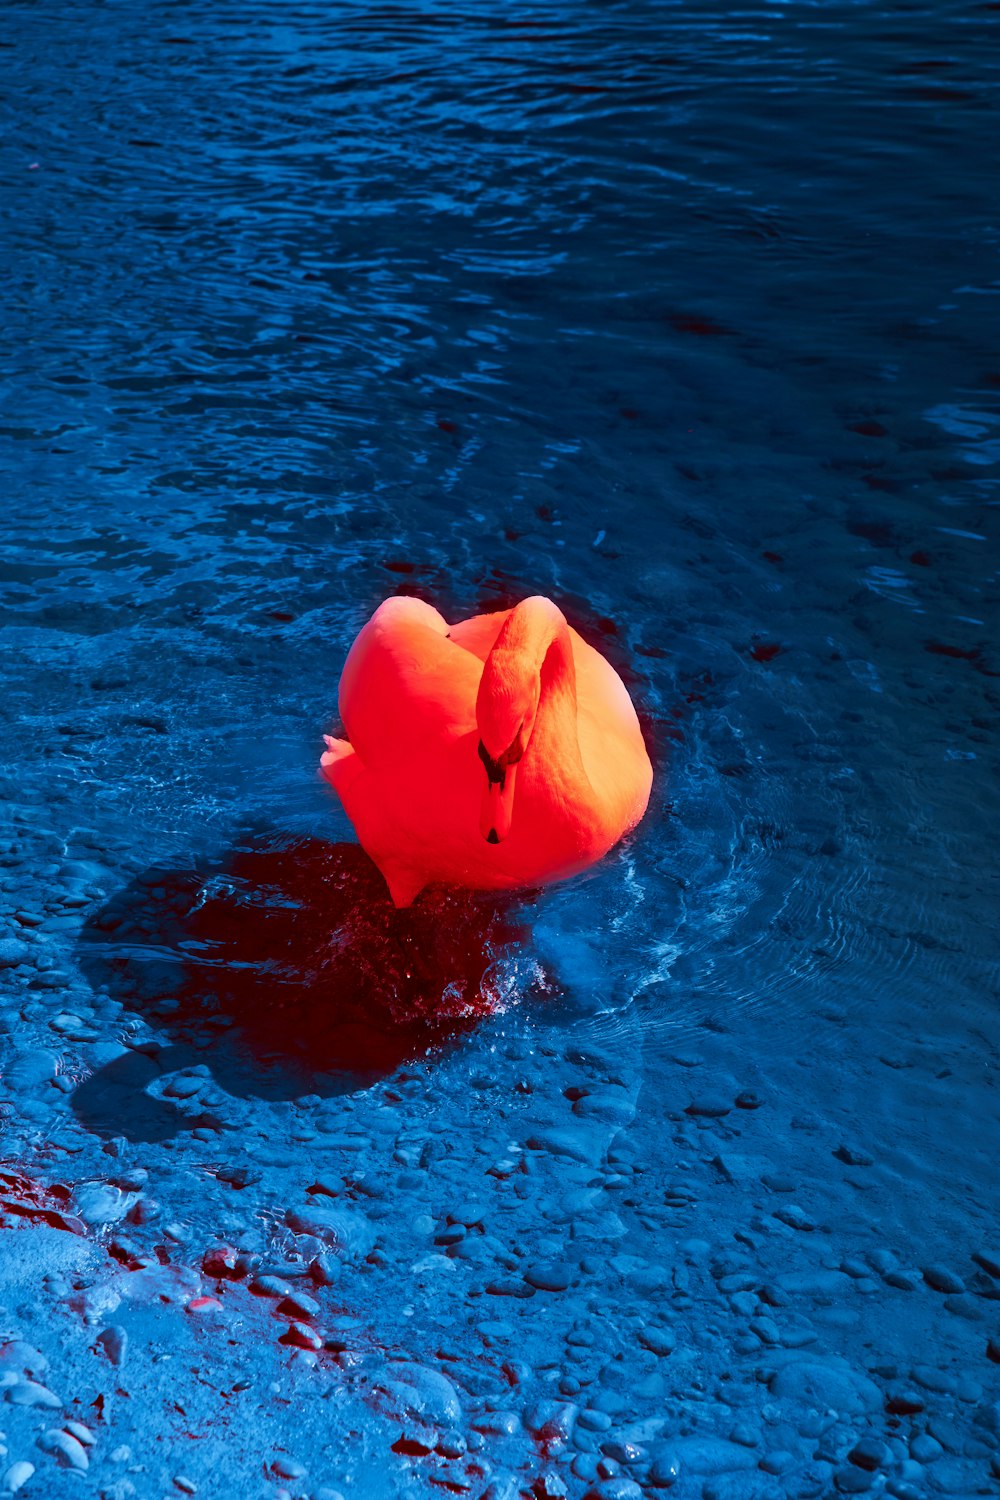 an inflatable object floating in a body of water